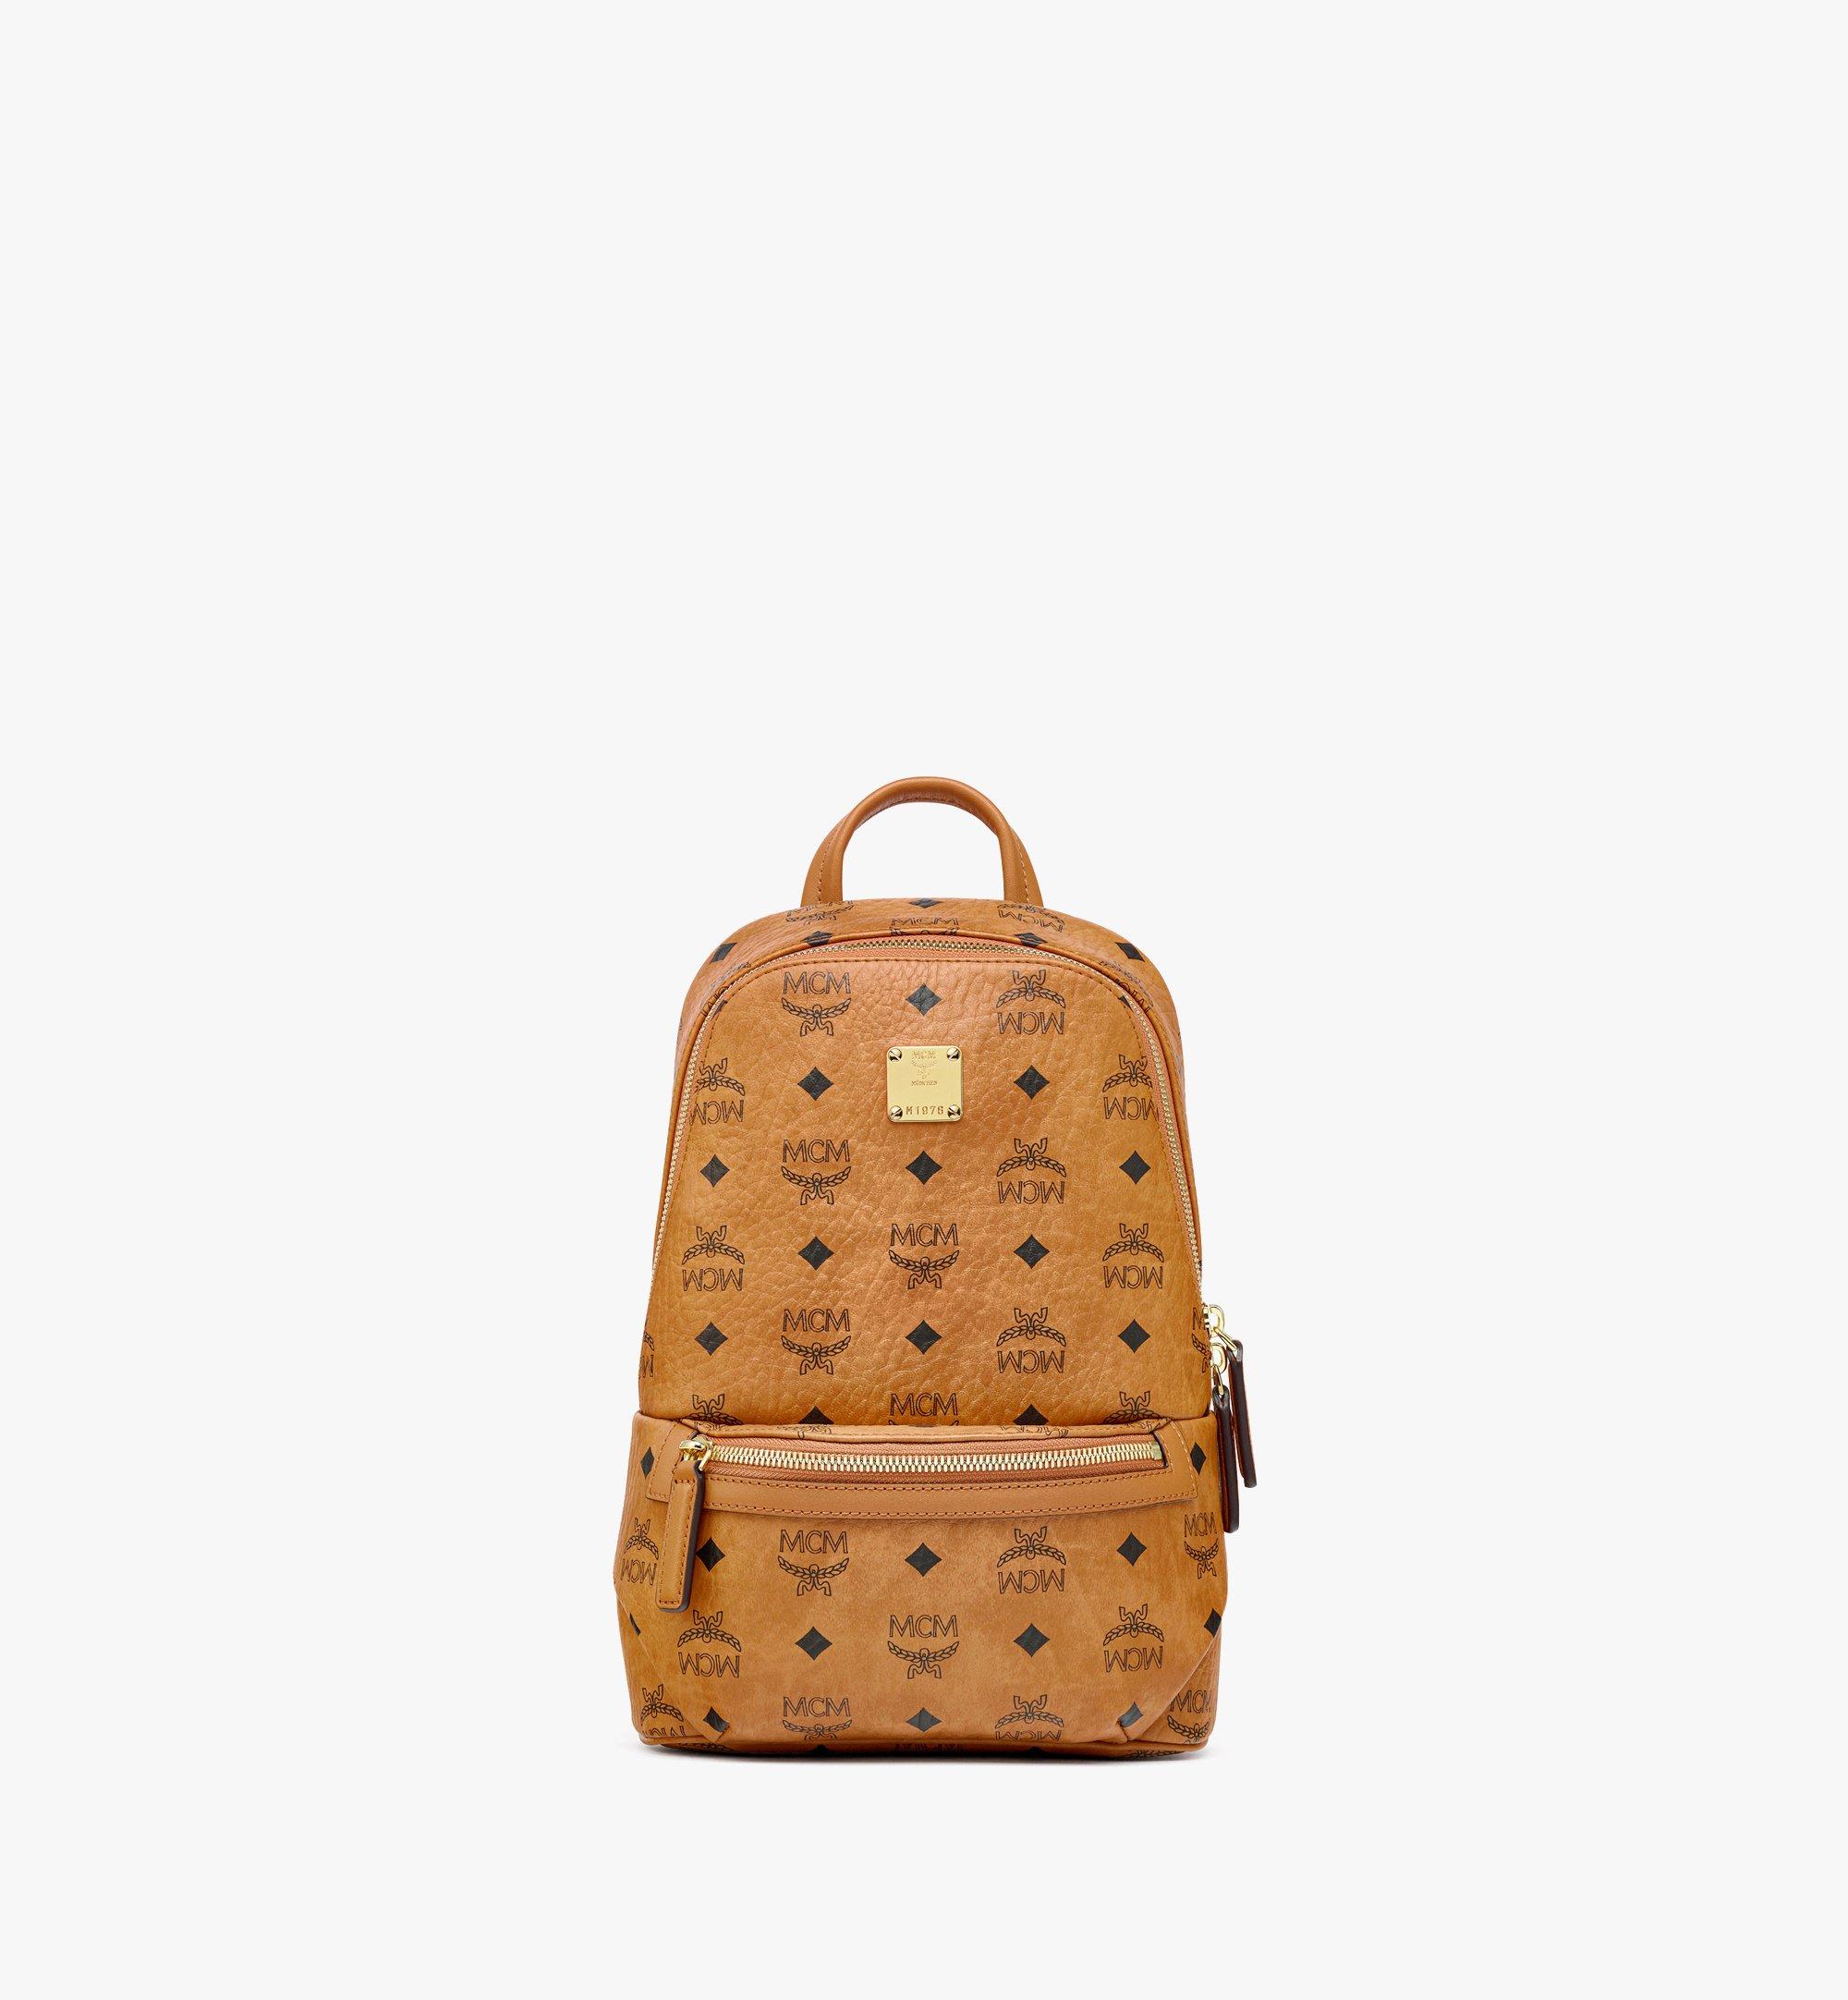 Authentic MCM Men's Backpacks, Luxury Leather Bags